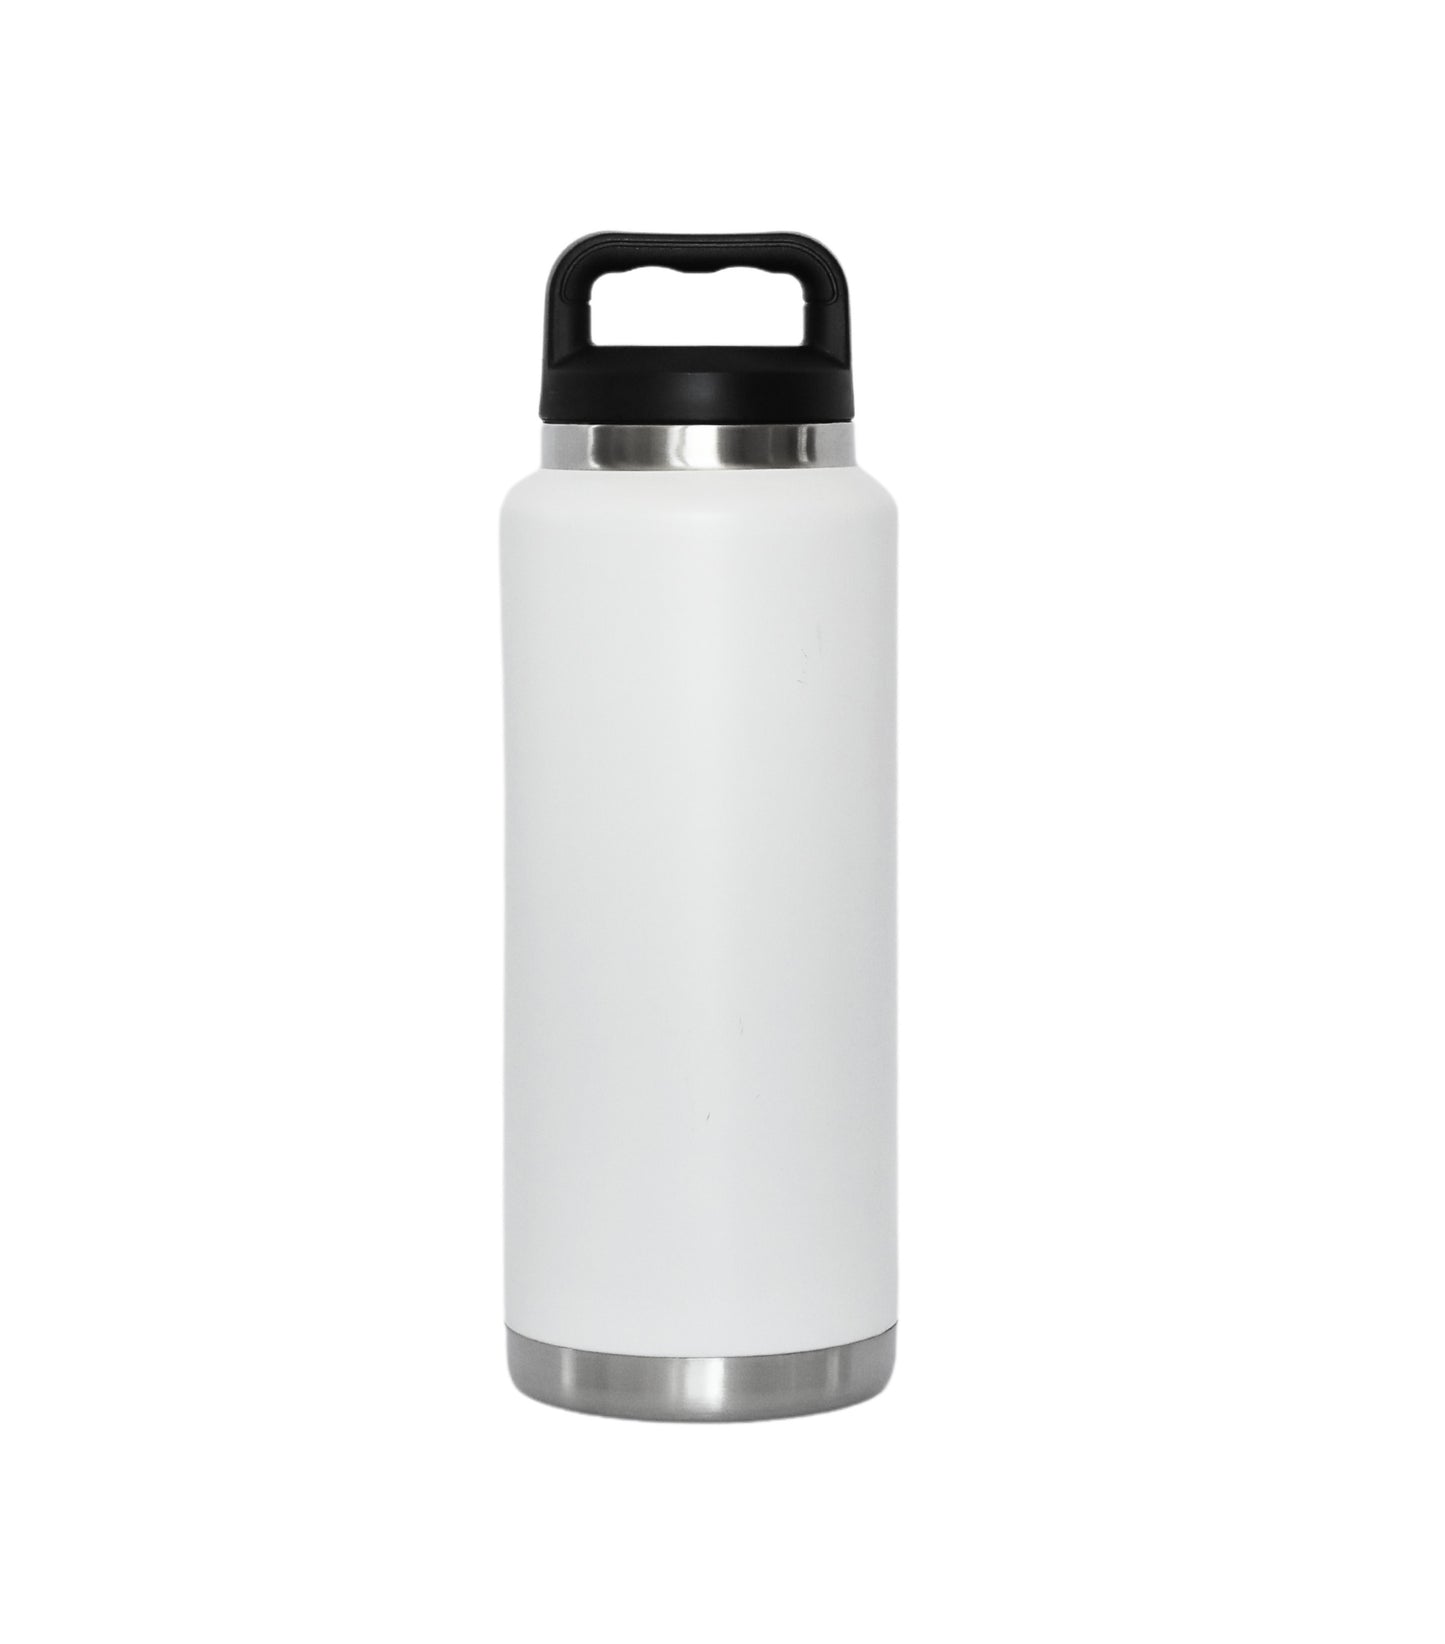 36 Oz Stainless Steel Water Bottle - White